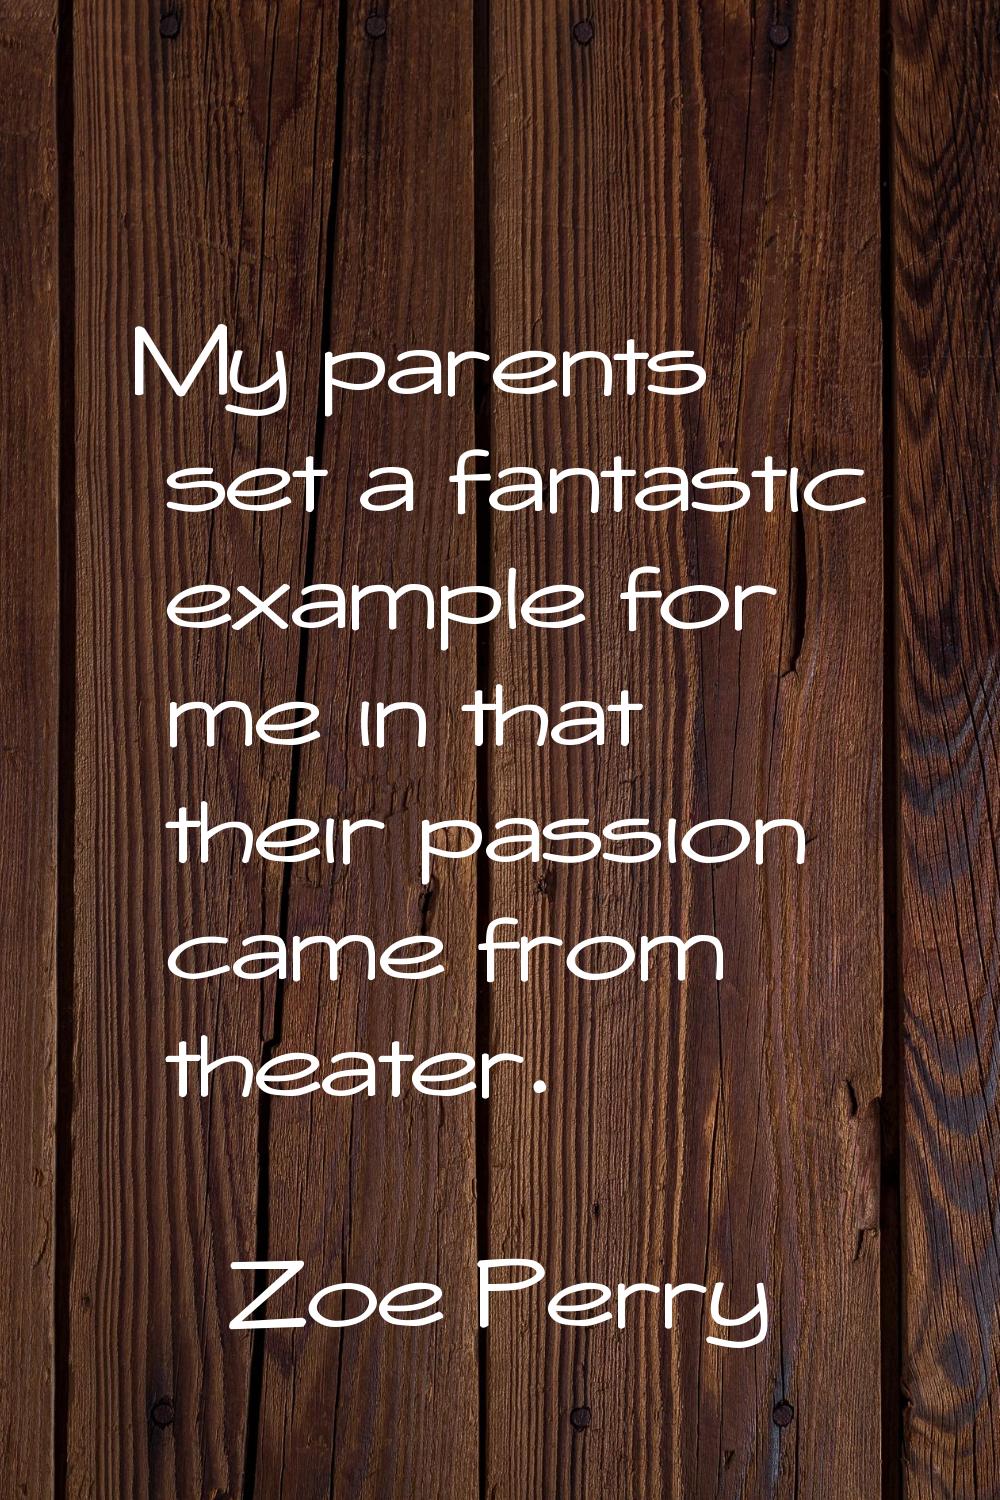 My parents set a fantastic example for me in that their passion came from theater.